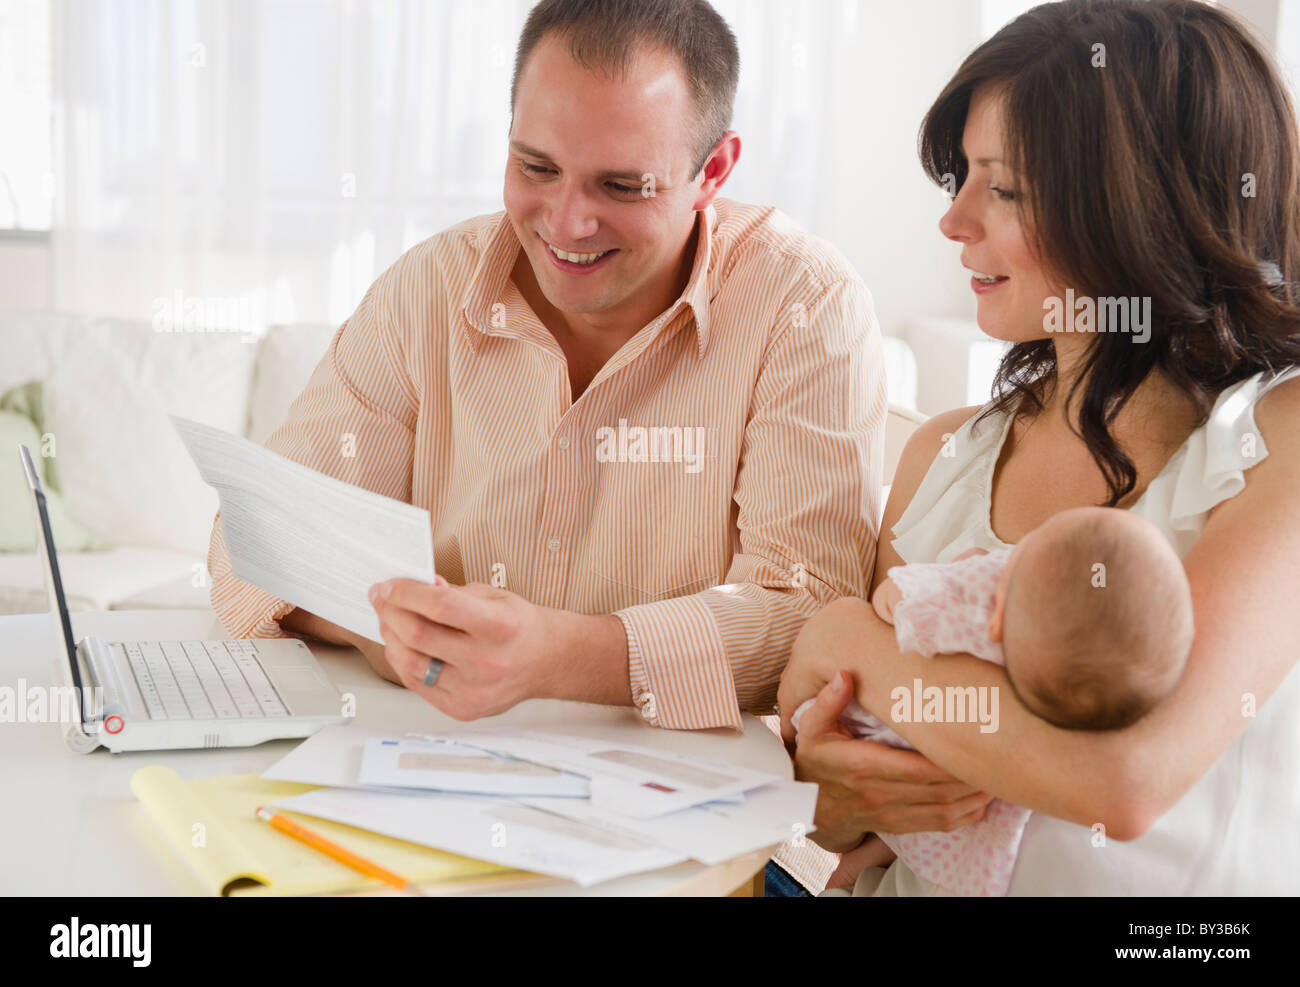 USA, New Jersey, Jersey City, Family with baby daughter (2-5 months) reading correspondence Stock Photo